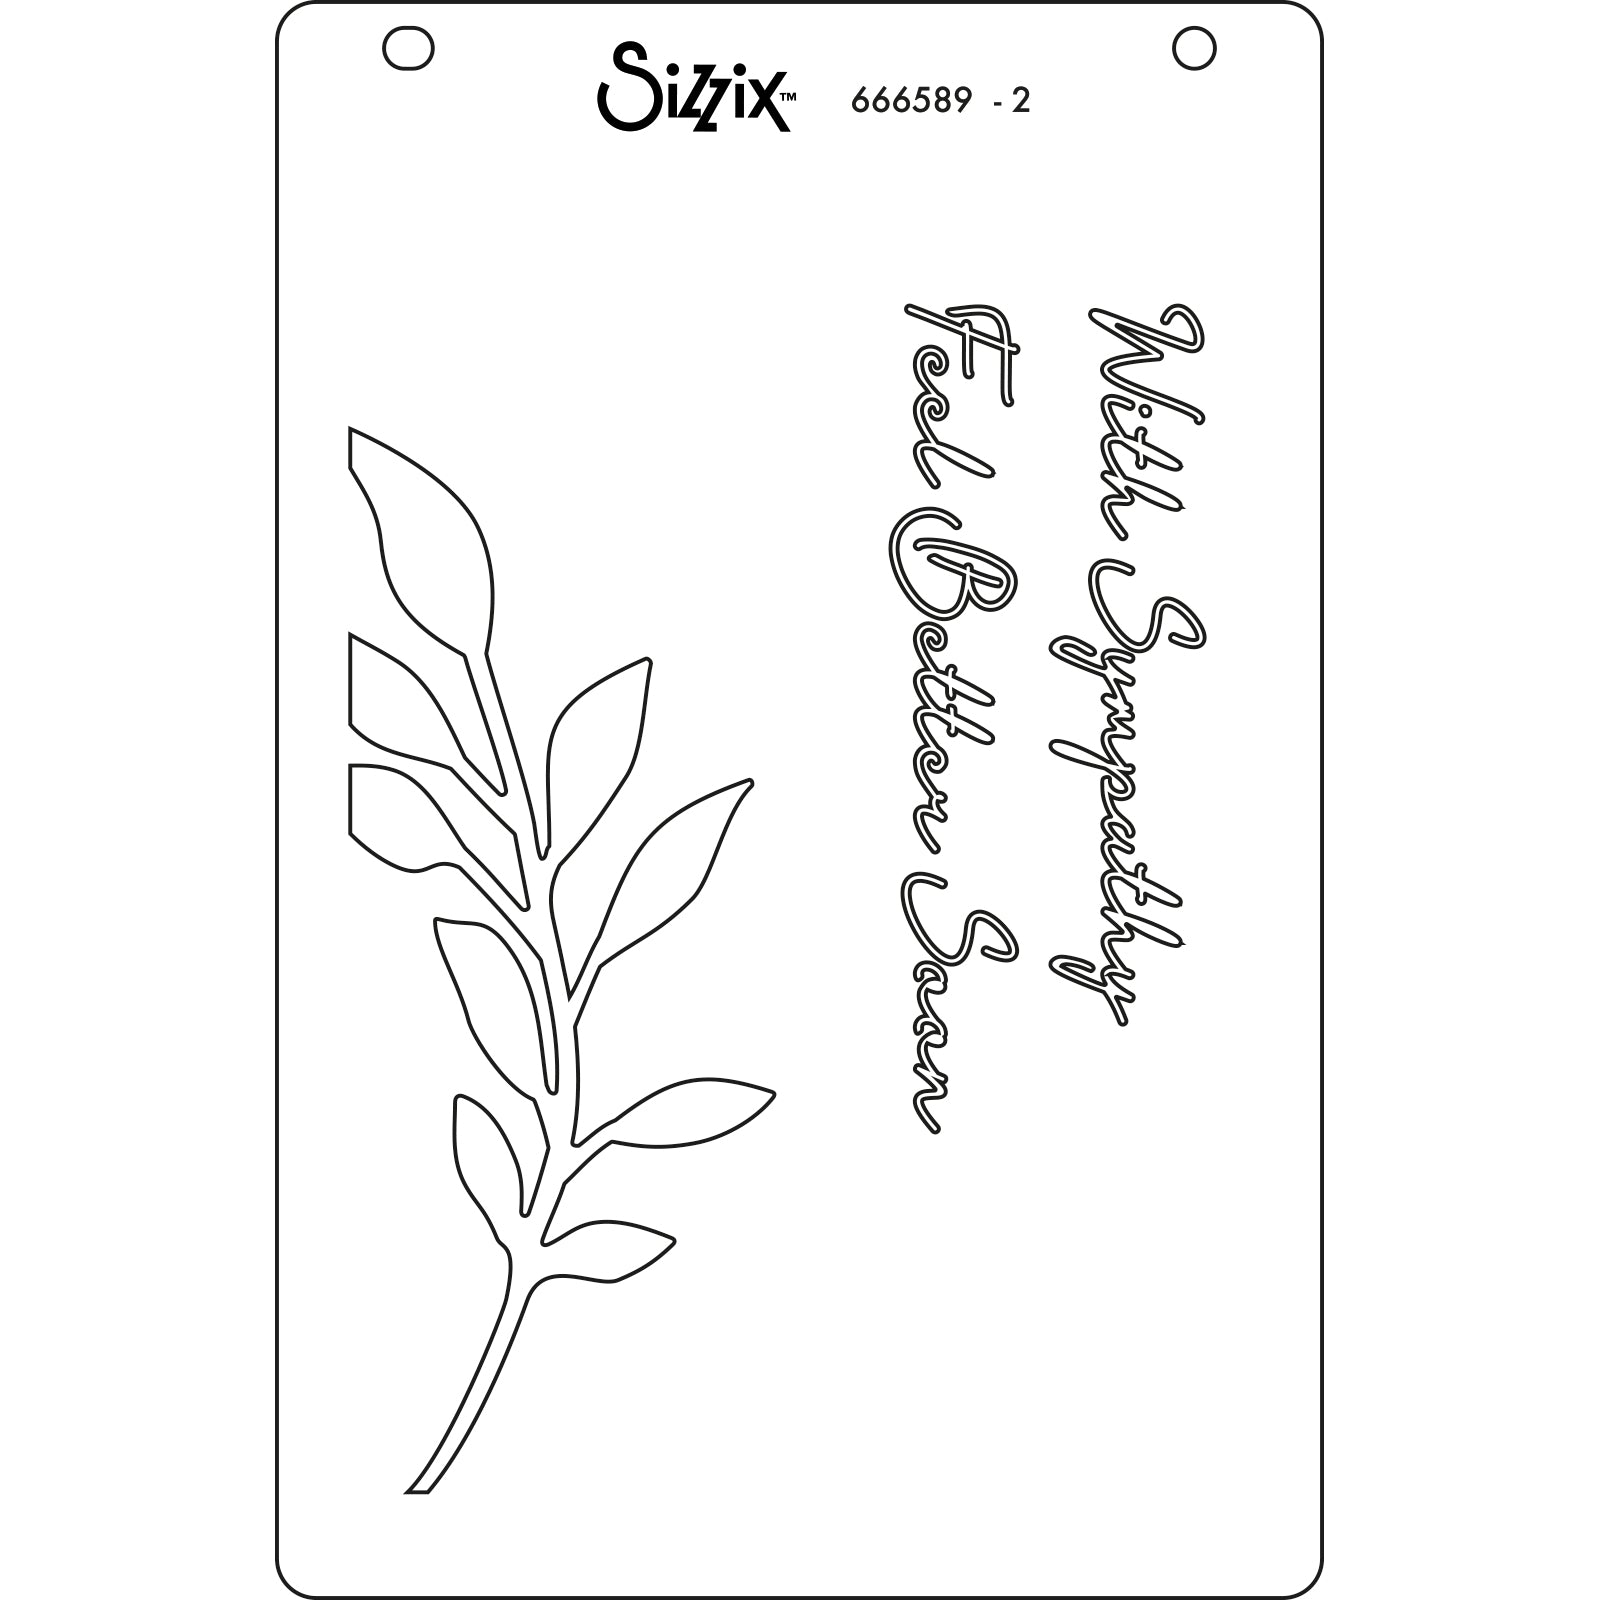 Sizzix A6 Layered Stencils 4PK Cosmopolitan, Frond by Stacey Park